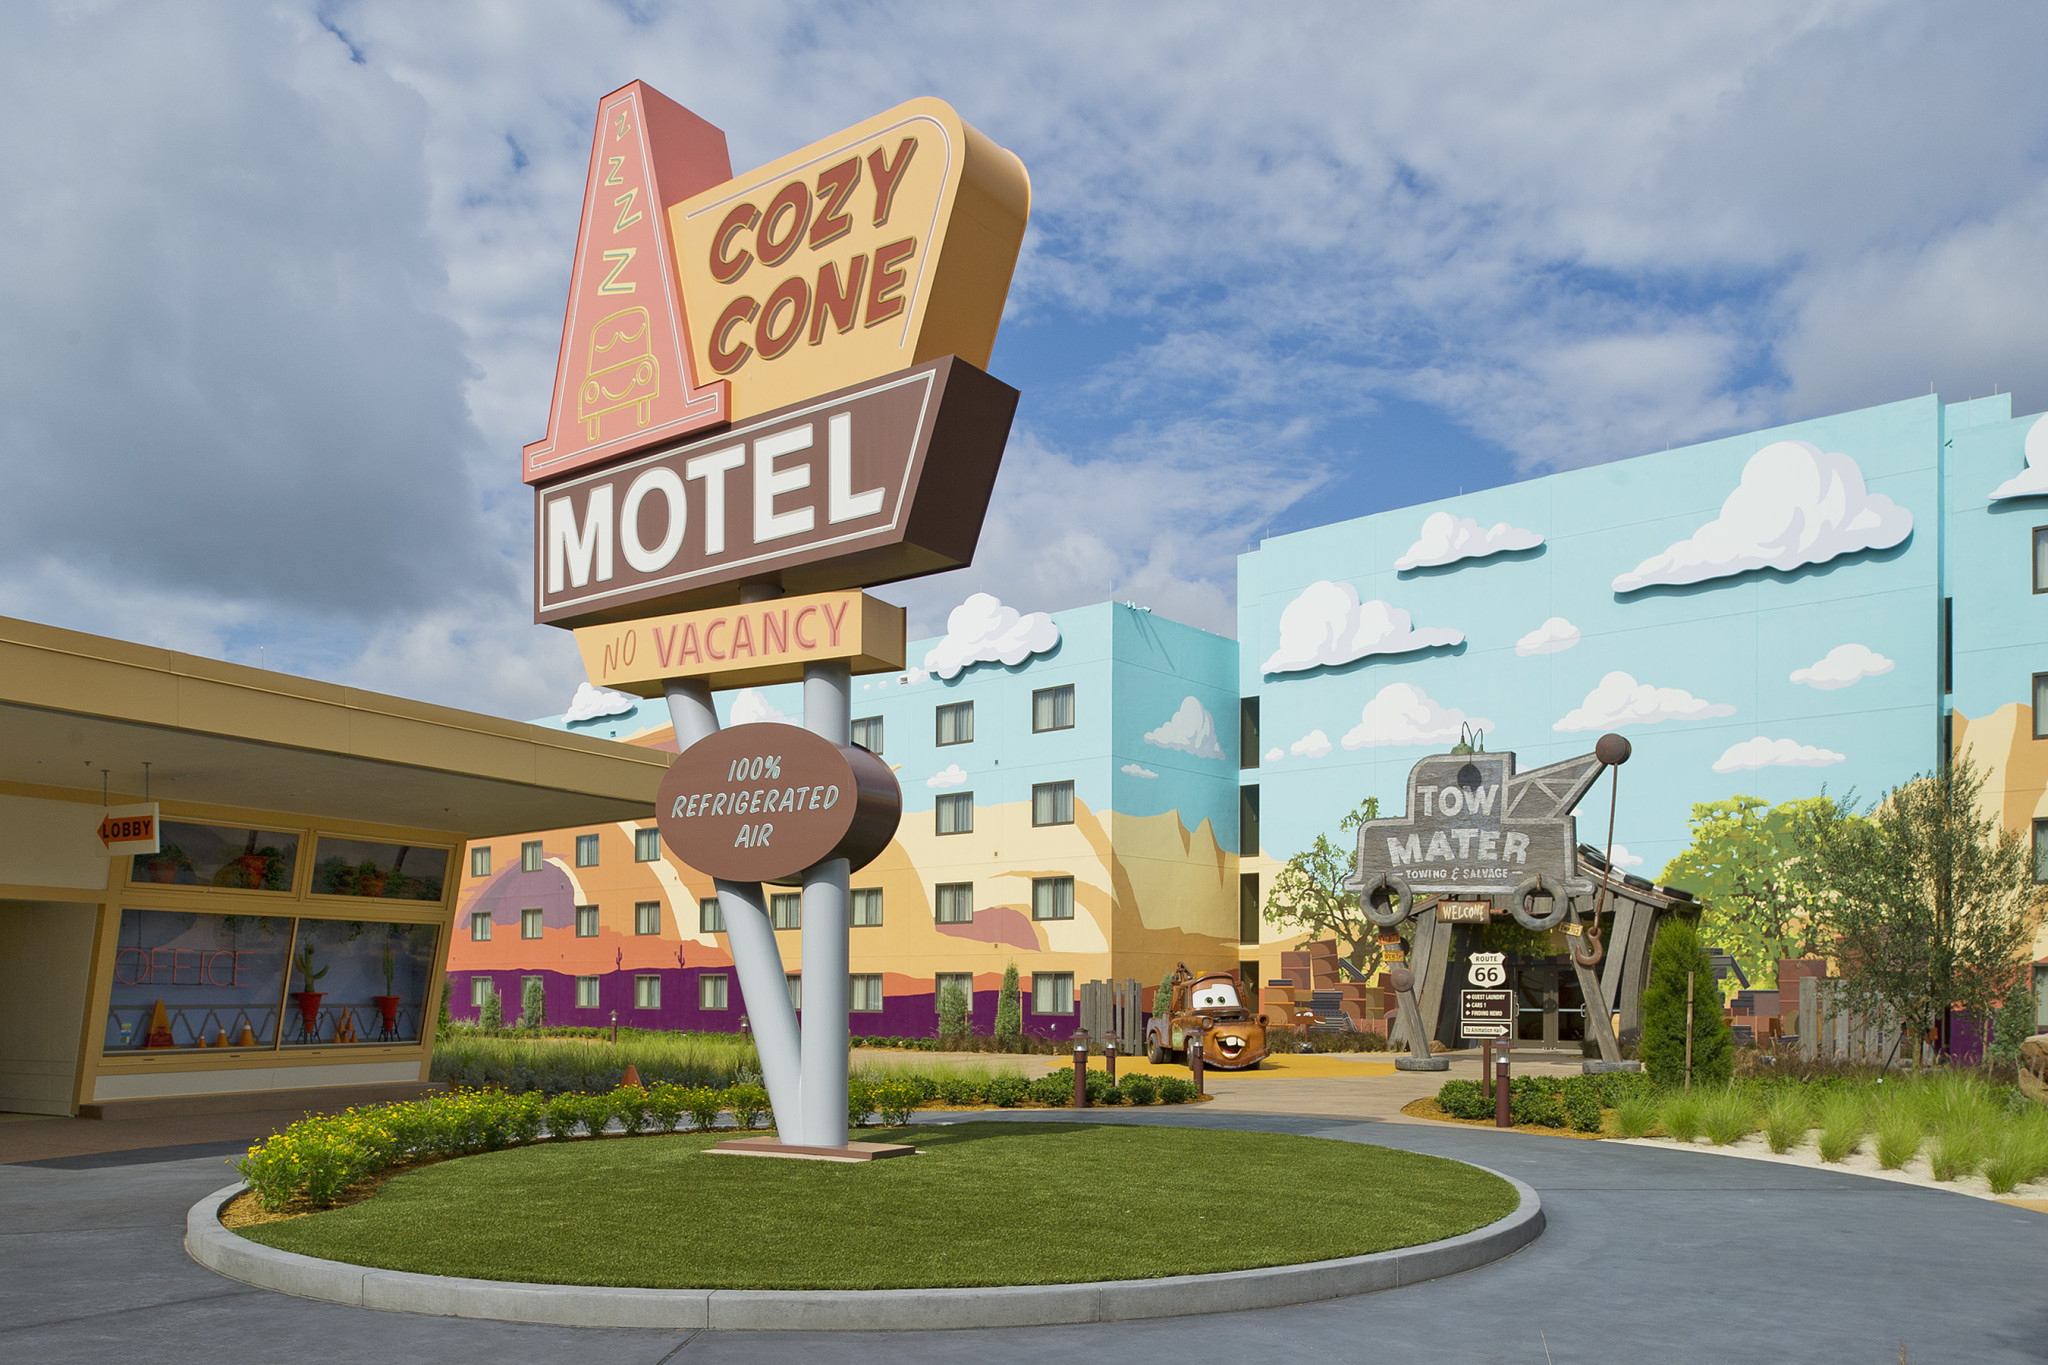 Can’t decide on where to stay on your Disney World Vacation? Take a Resort Tour!